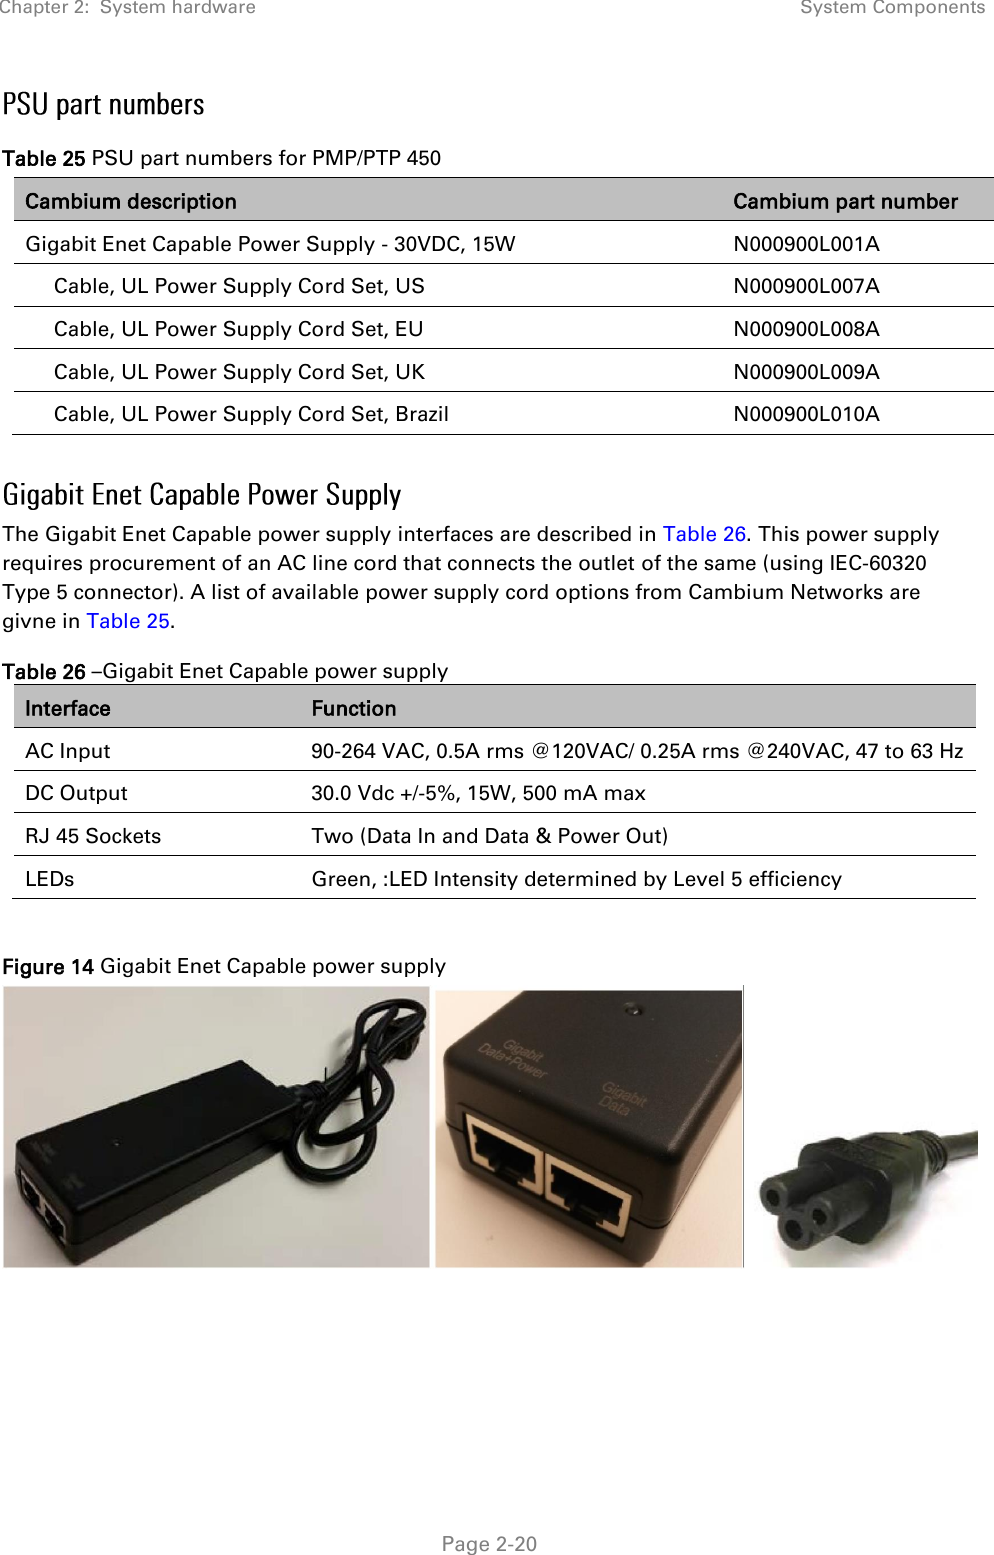 Chapter 2:  System hardware System Components   Page 2-20 Table 25 PSU part numbers for PMP/PTP 450 Cambium description Cambium part number Gigabit Enet Capable Power Supply - 30VDC, 15W N000900L001A      Cable, UL Power Supply Cord Set, US N000900L007A      Cable, UL Power Supply Cord Set, EU N000900L008A      Cable, UL Power Supply Cord Set, UK N000900L009A      Cable, UL Power Supply Cord Set, Brazil N000900L010A  The Gigabit Enet Capable power supply interfaces are described in Table 26. This power supply requires procurement of an AC line cord that connects the outlet of the same (using IEC-60320 Type 5 connector). A list of available power supply cord options from Cambium Networks are givne in Table 25. Table 26 –Gigabit Enet Capable power supply Interface Function AC Input 90-264 VAC, 0.5A rms @120VAC/ 0.25A rms @240VAC, 47 to 63 Hz DC Output 30.0 Vdc +/-5%, 15W, 500 mA max RJ 45 Sockets Two (Data In and Data &amp; Power Out) LEDs Green, :LED Intensity determined by Level 5 efficiency  Figure 14 Gigabit Enet Capable power supply     